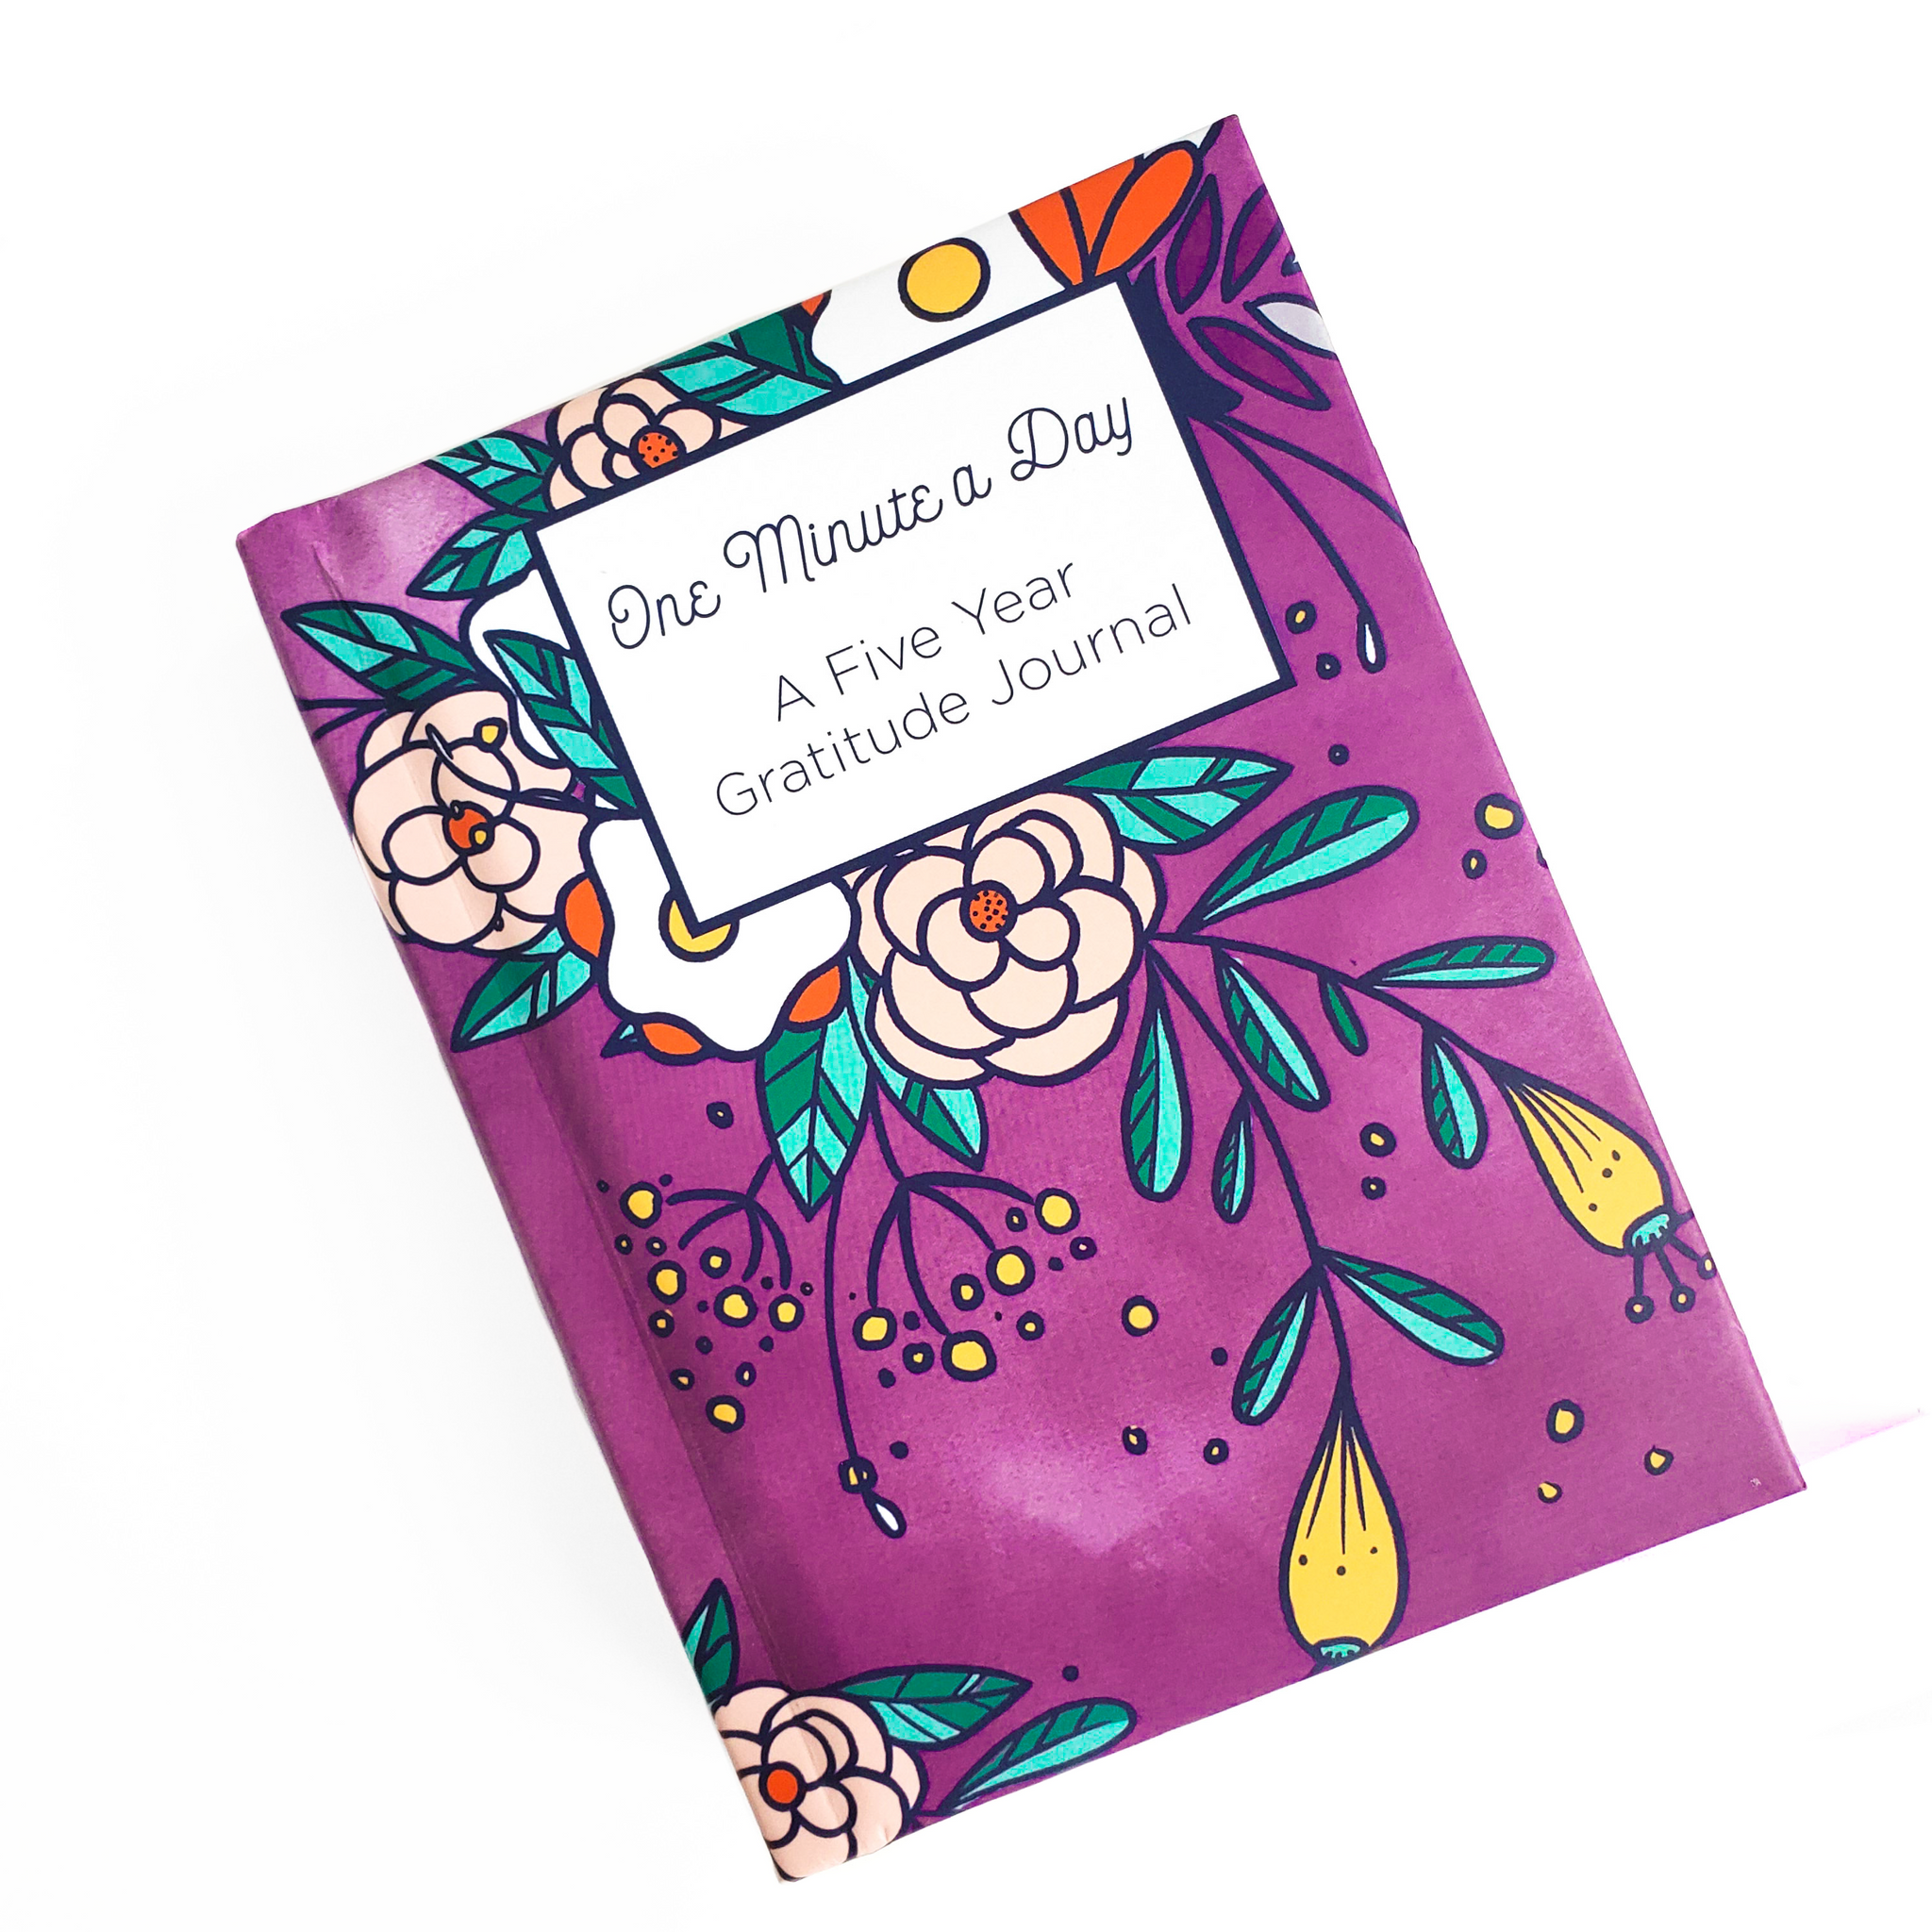 One Minute A Day: A 5-Year Gratitude Journal (Minor Errors) – The